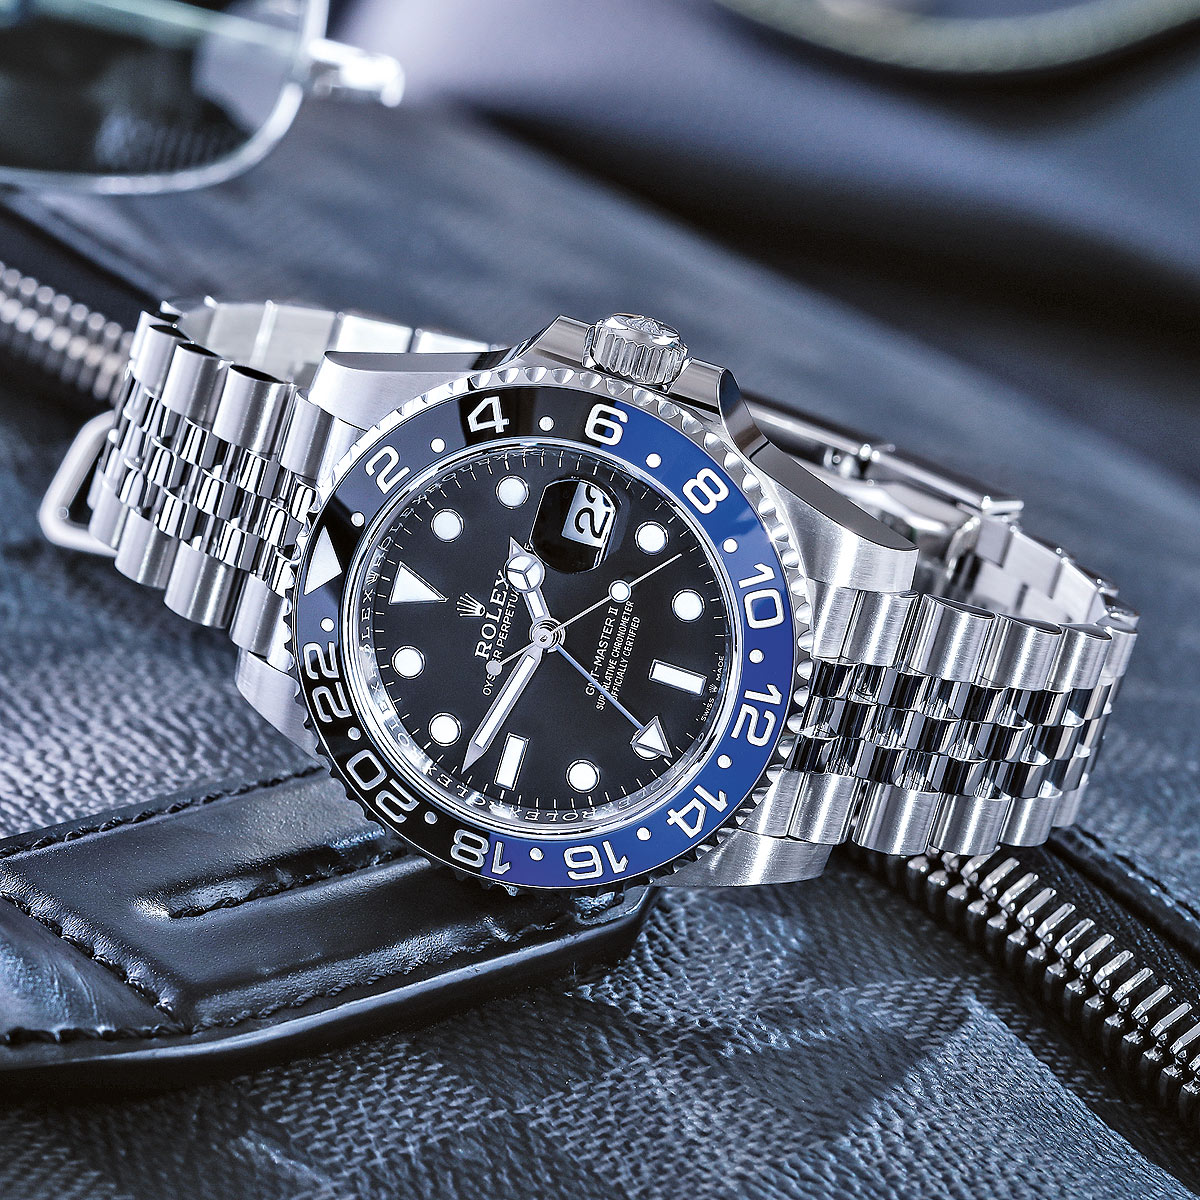 Is this the End of the Rolex Hulk?